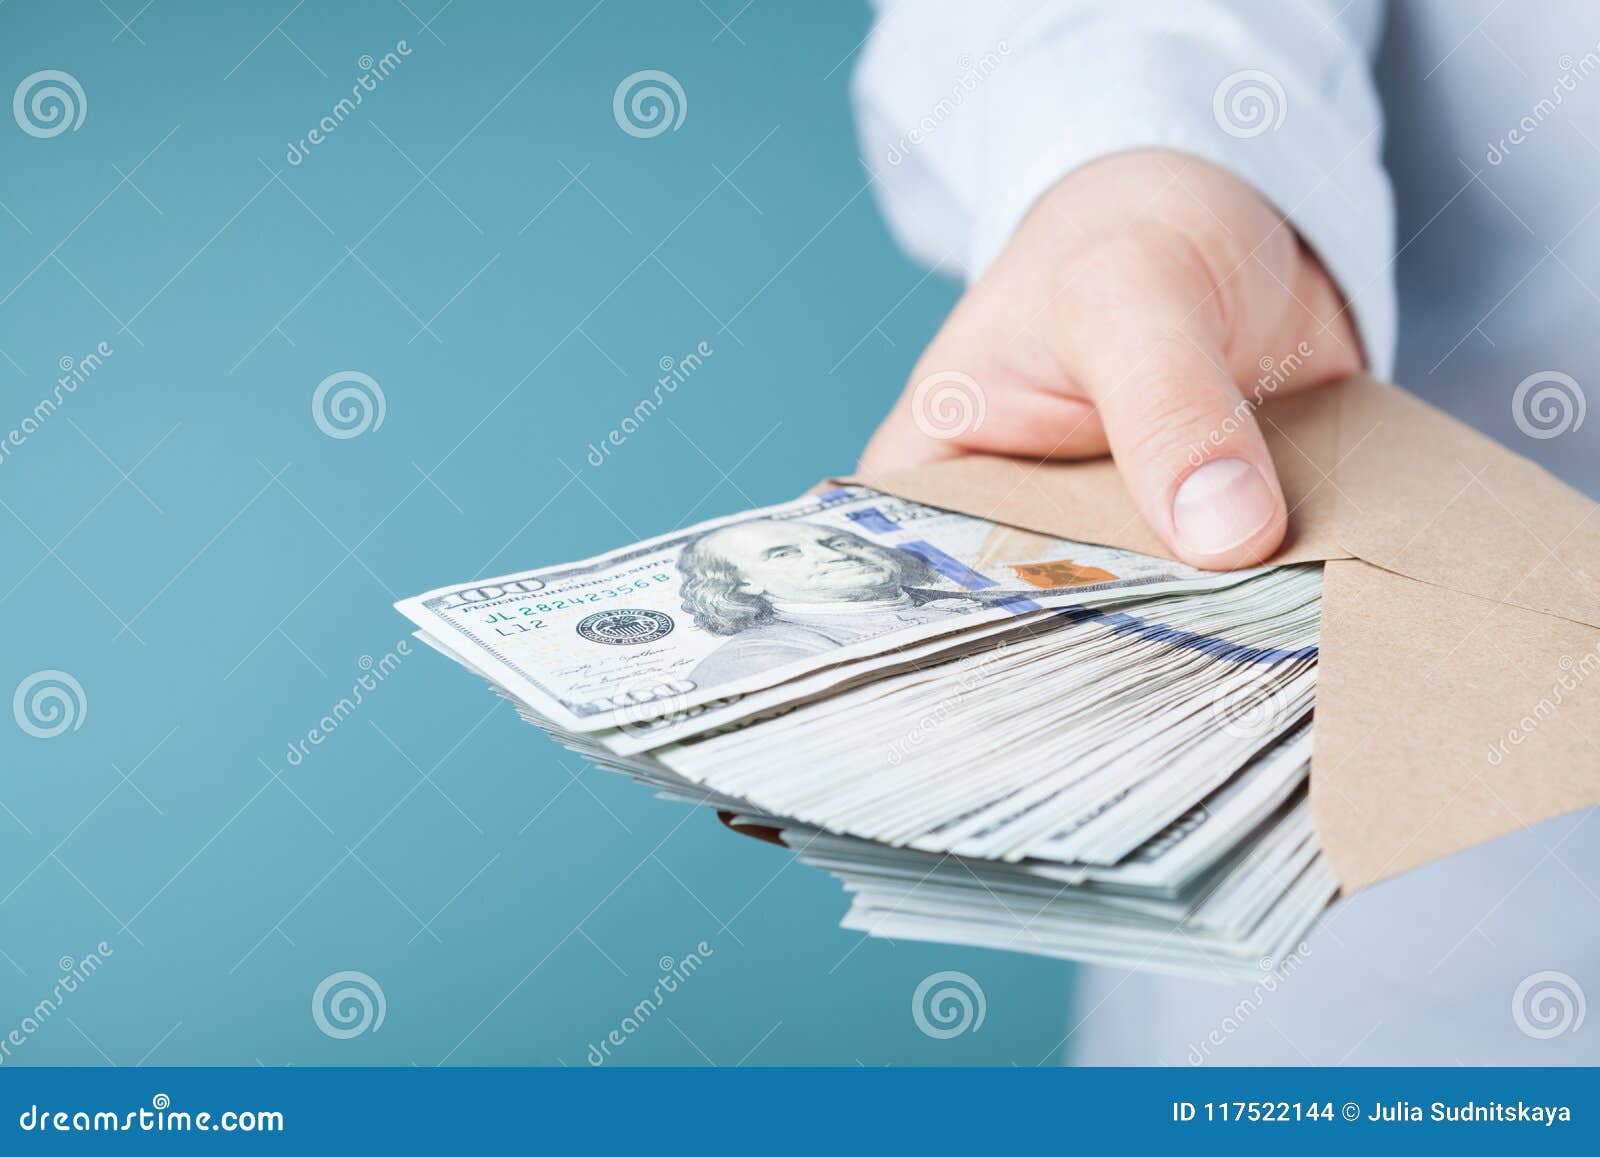 businessman giving cash money. loan, finance, salary, bribe and donate concept.